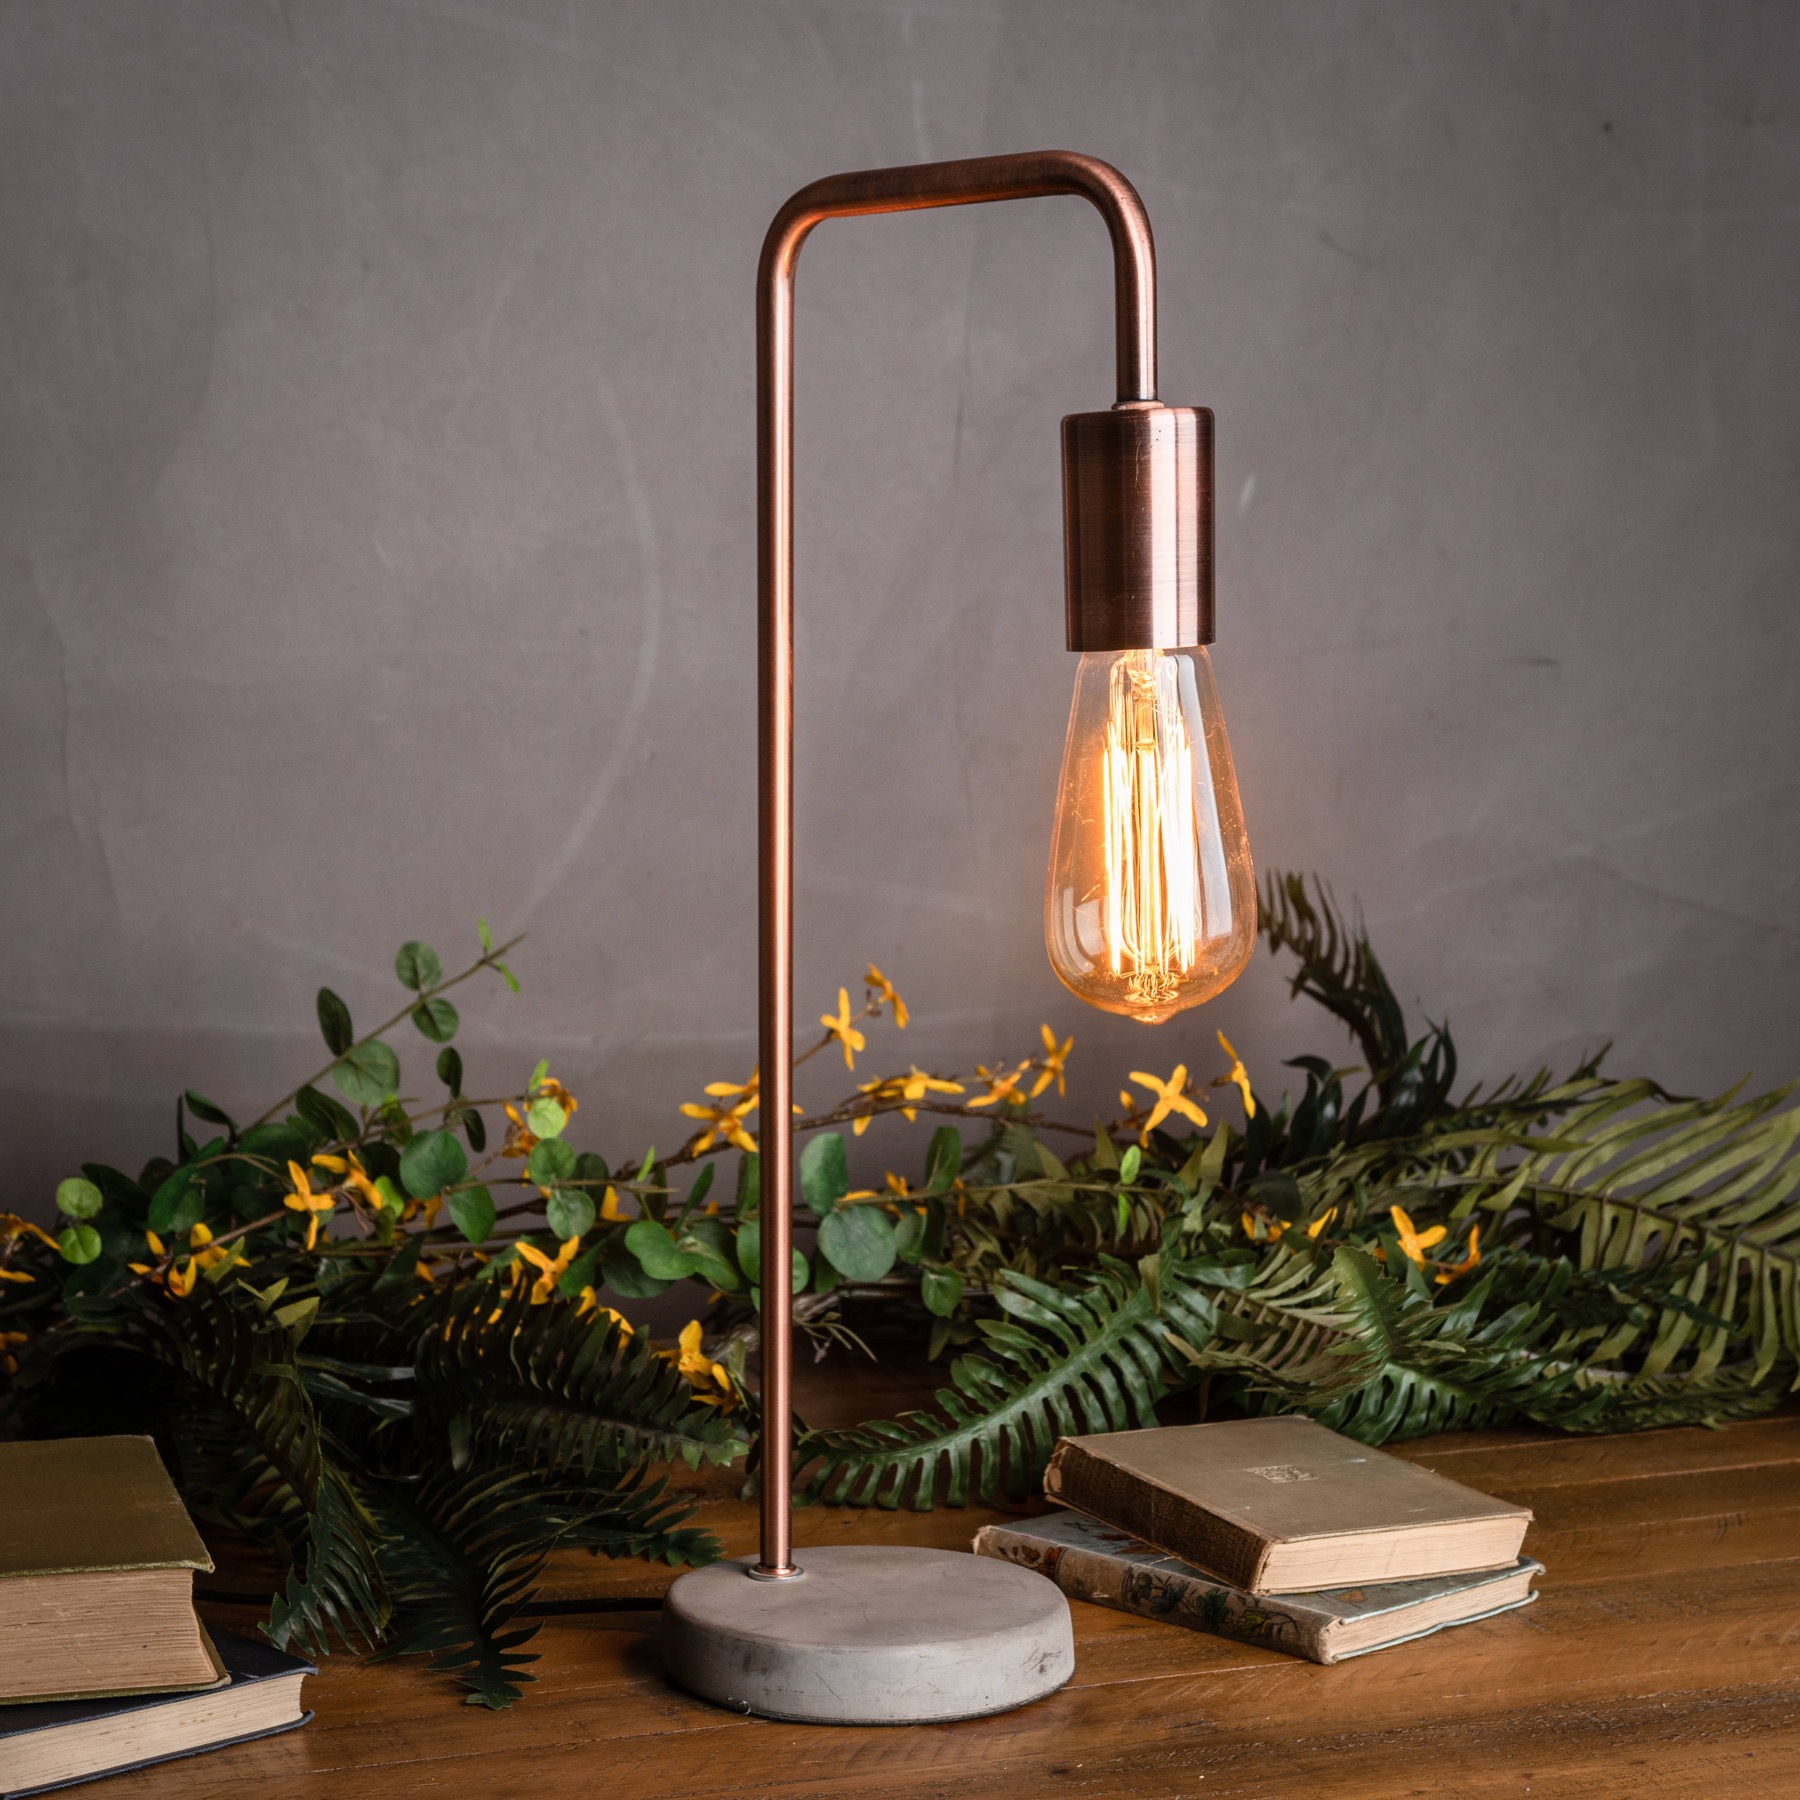 Copper Industrial Lamp With Stone Base - Image 4